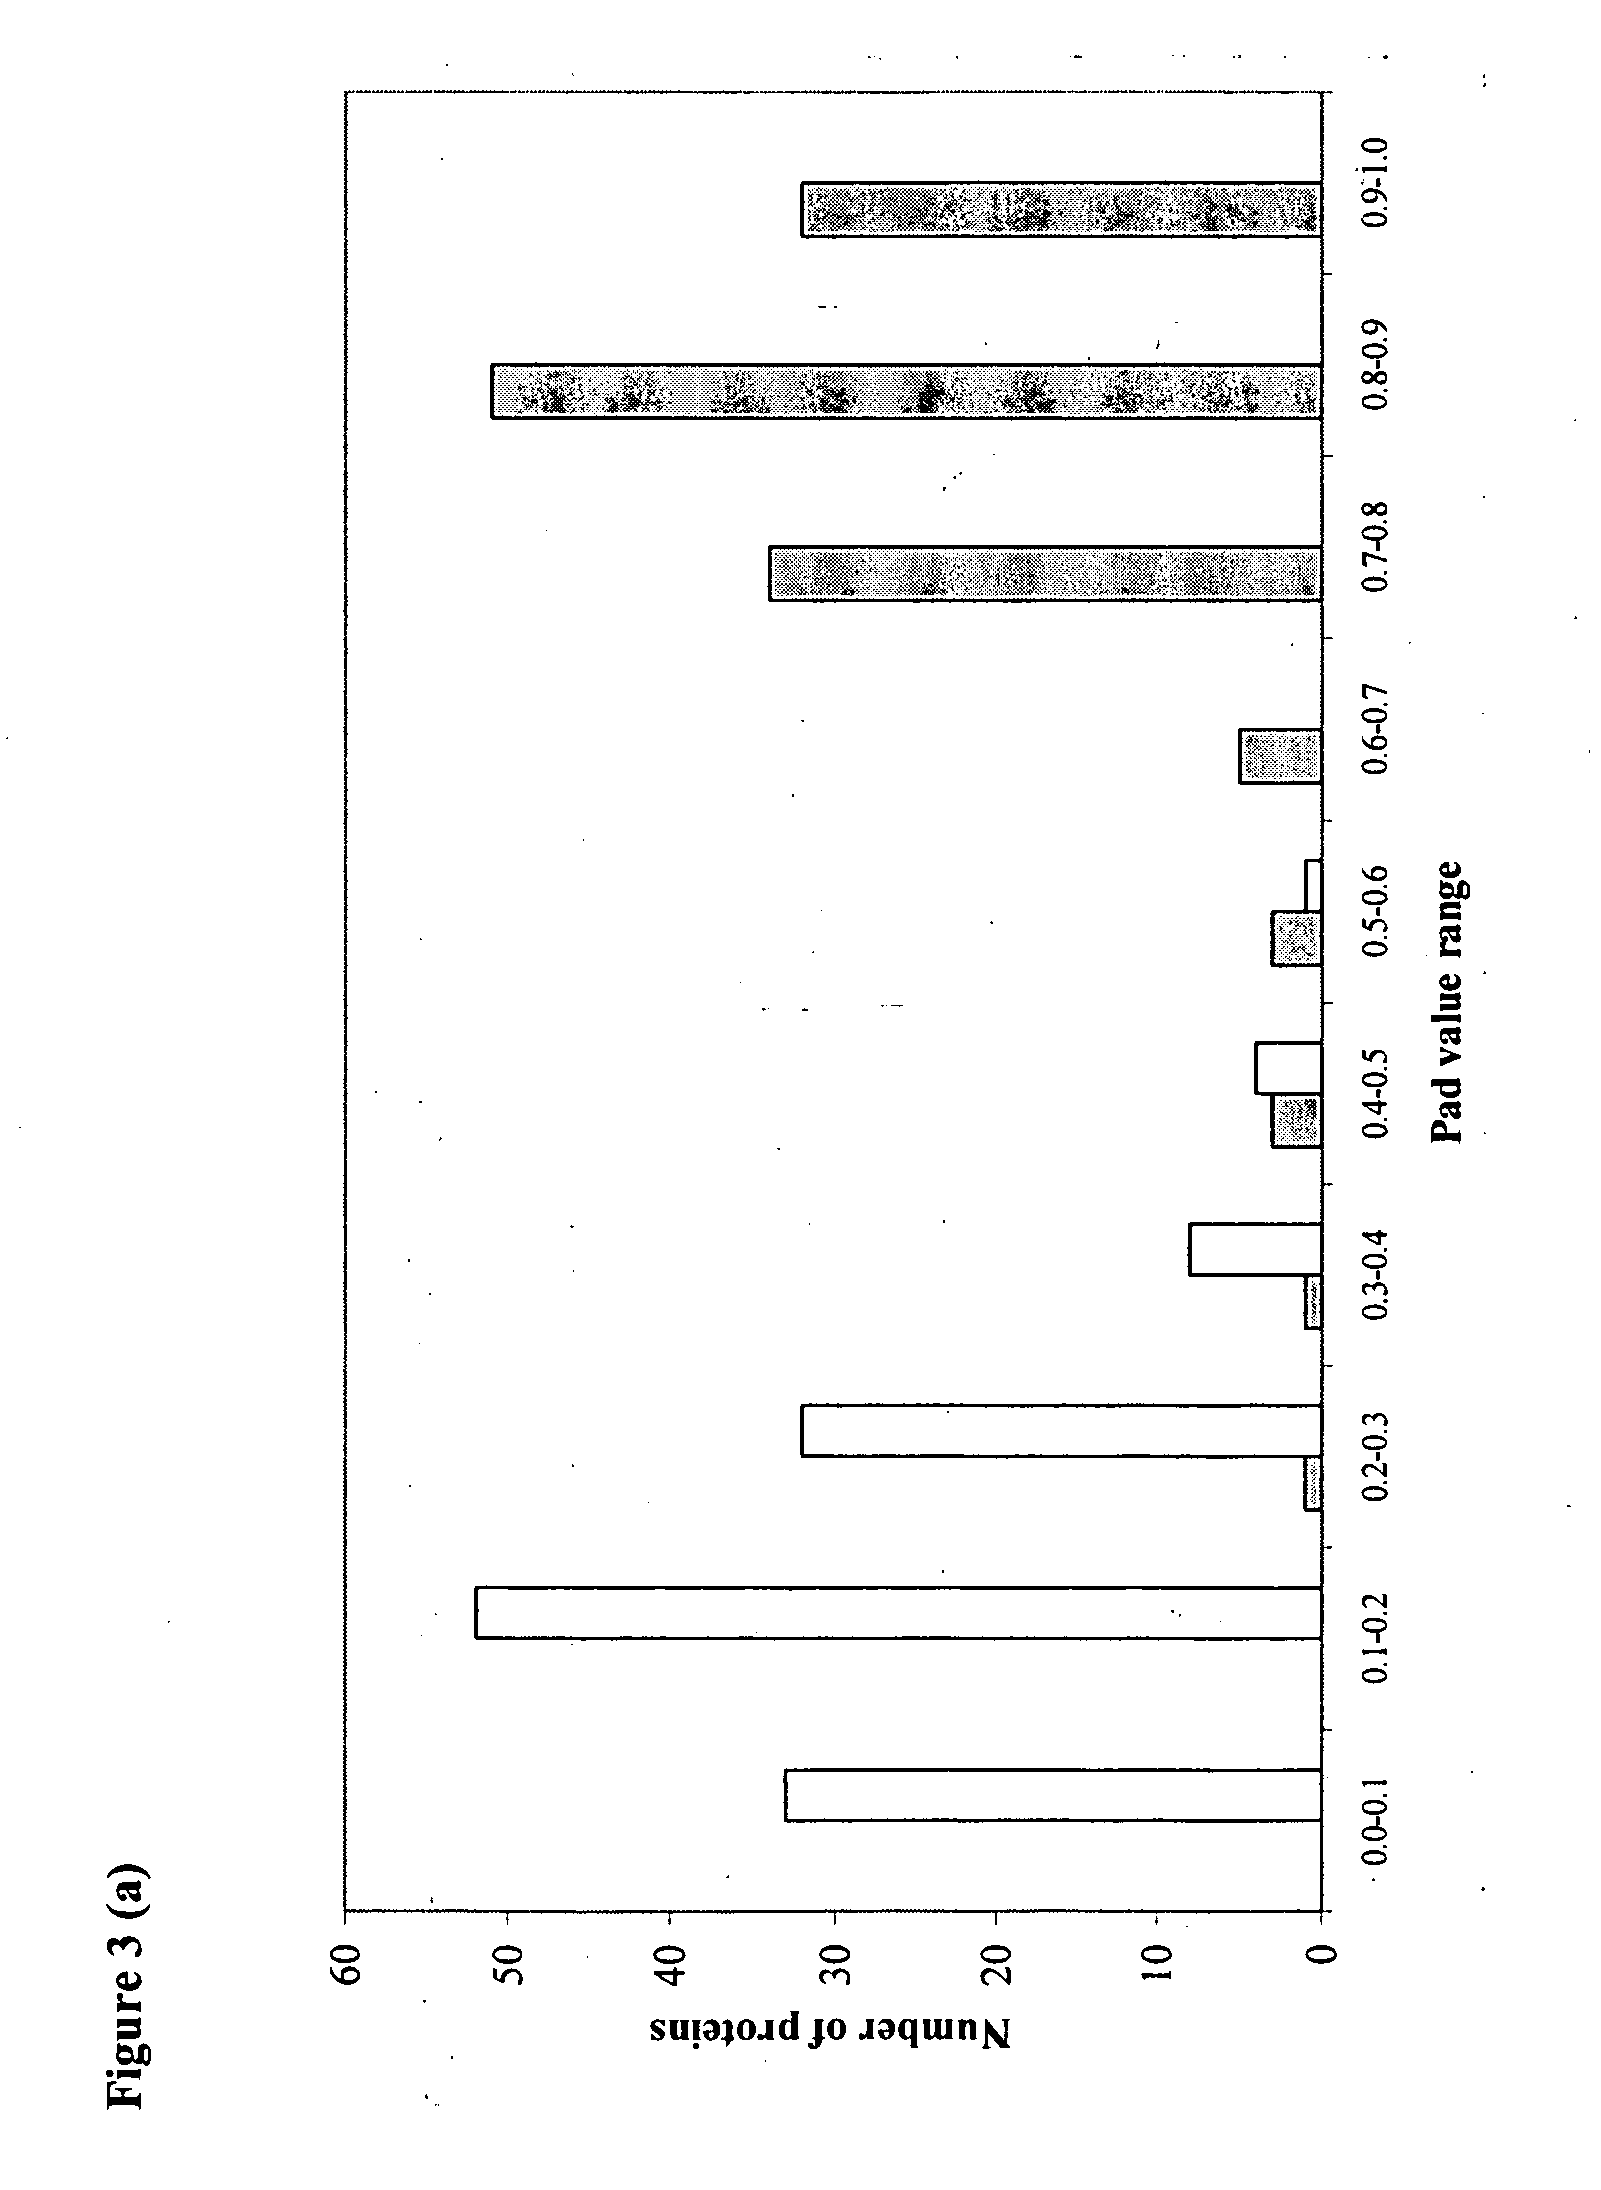 Computational method for identifying adhesin and adhesin-like proteins of therapeutic potential